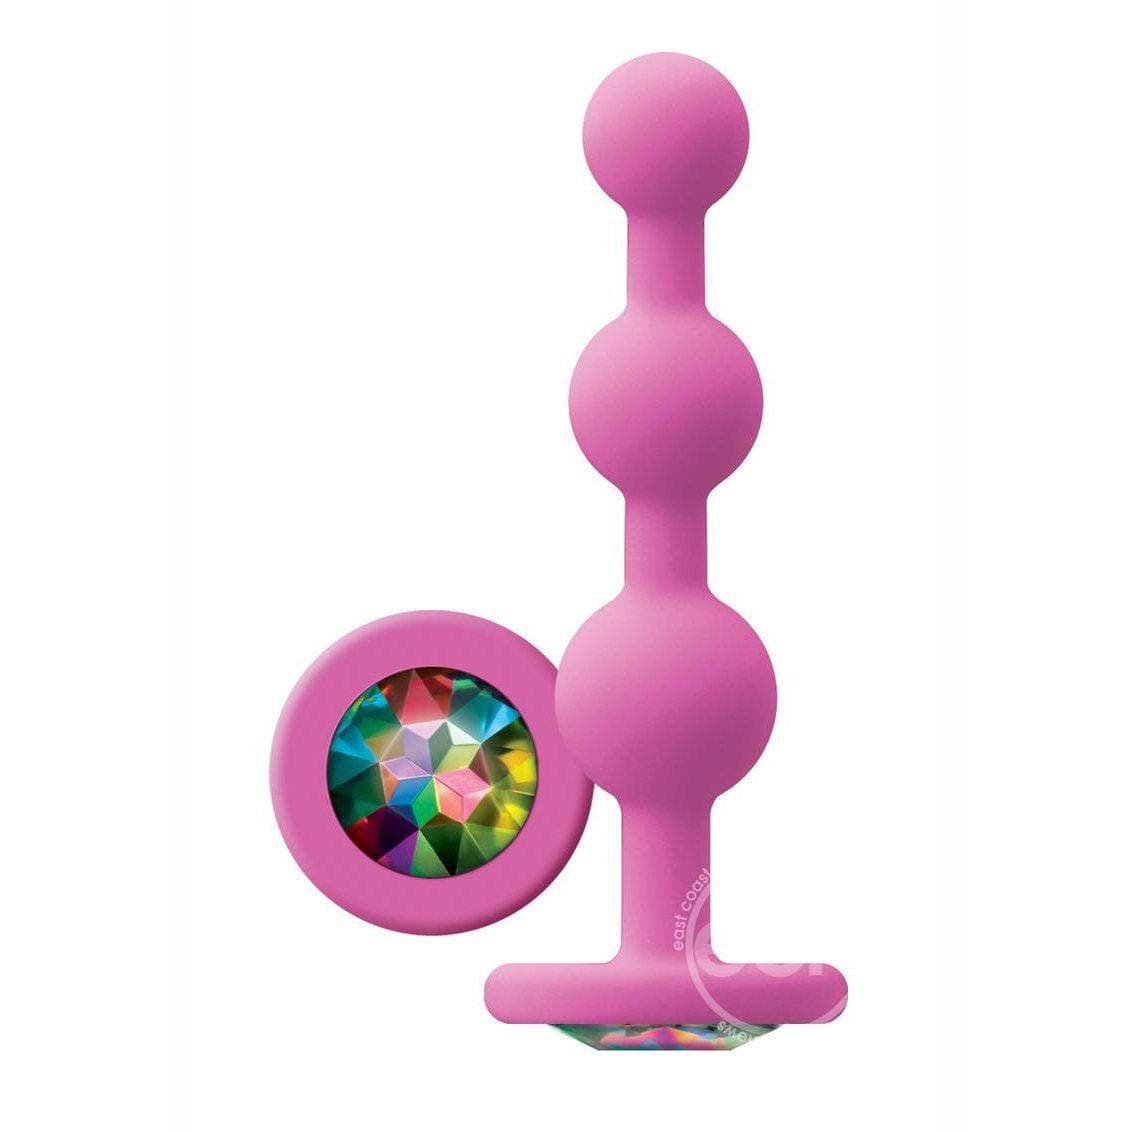 Glams Ripple Silicone Anal Plug Rainbow Gem 4.49 in - Romantic Blessings